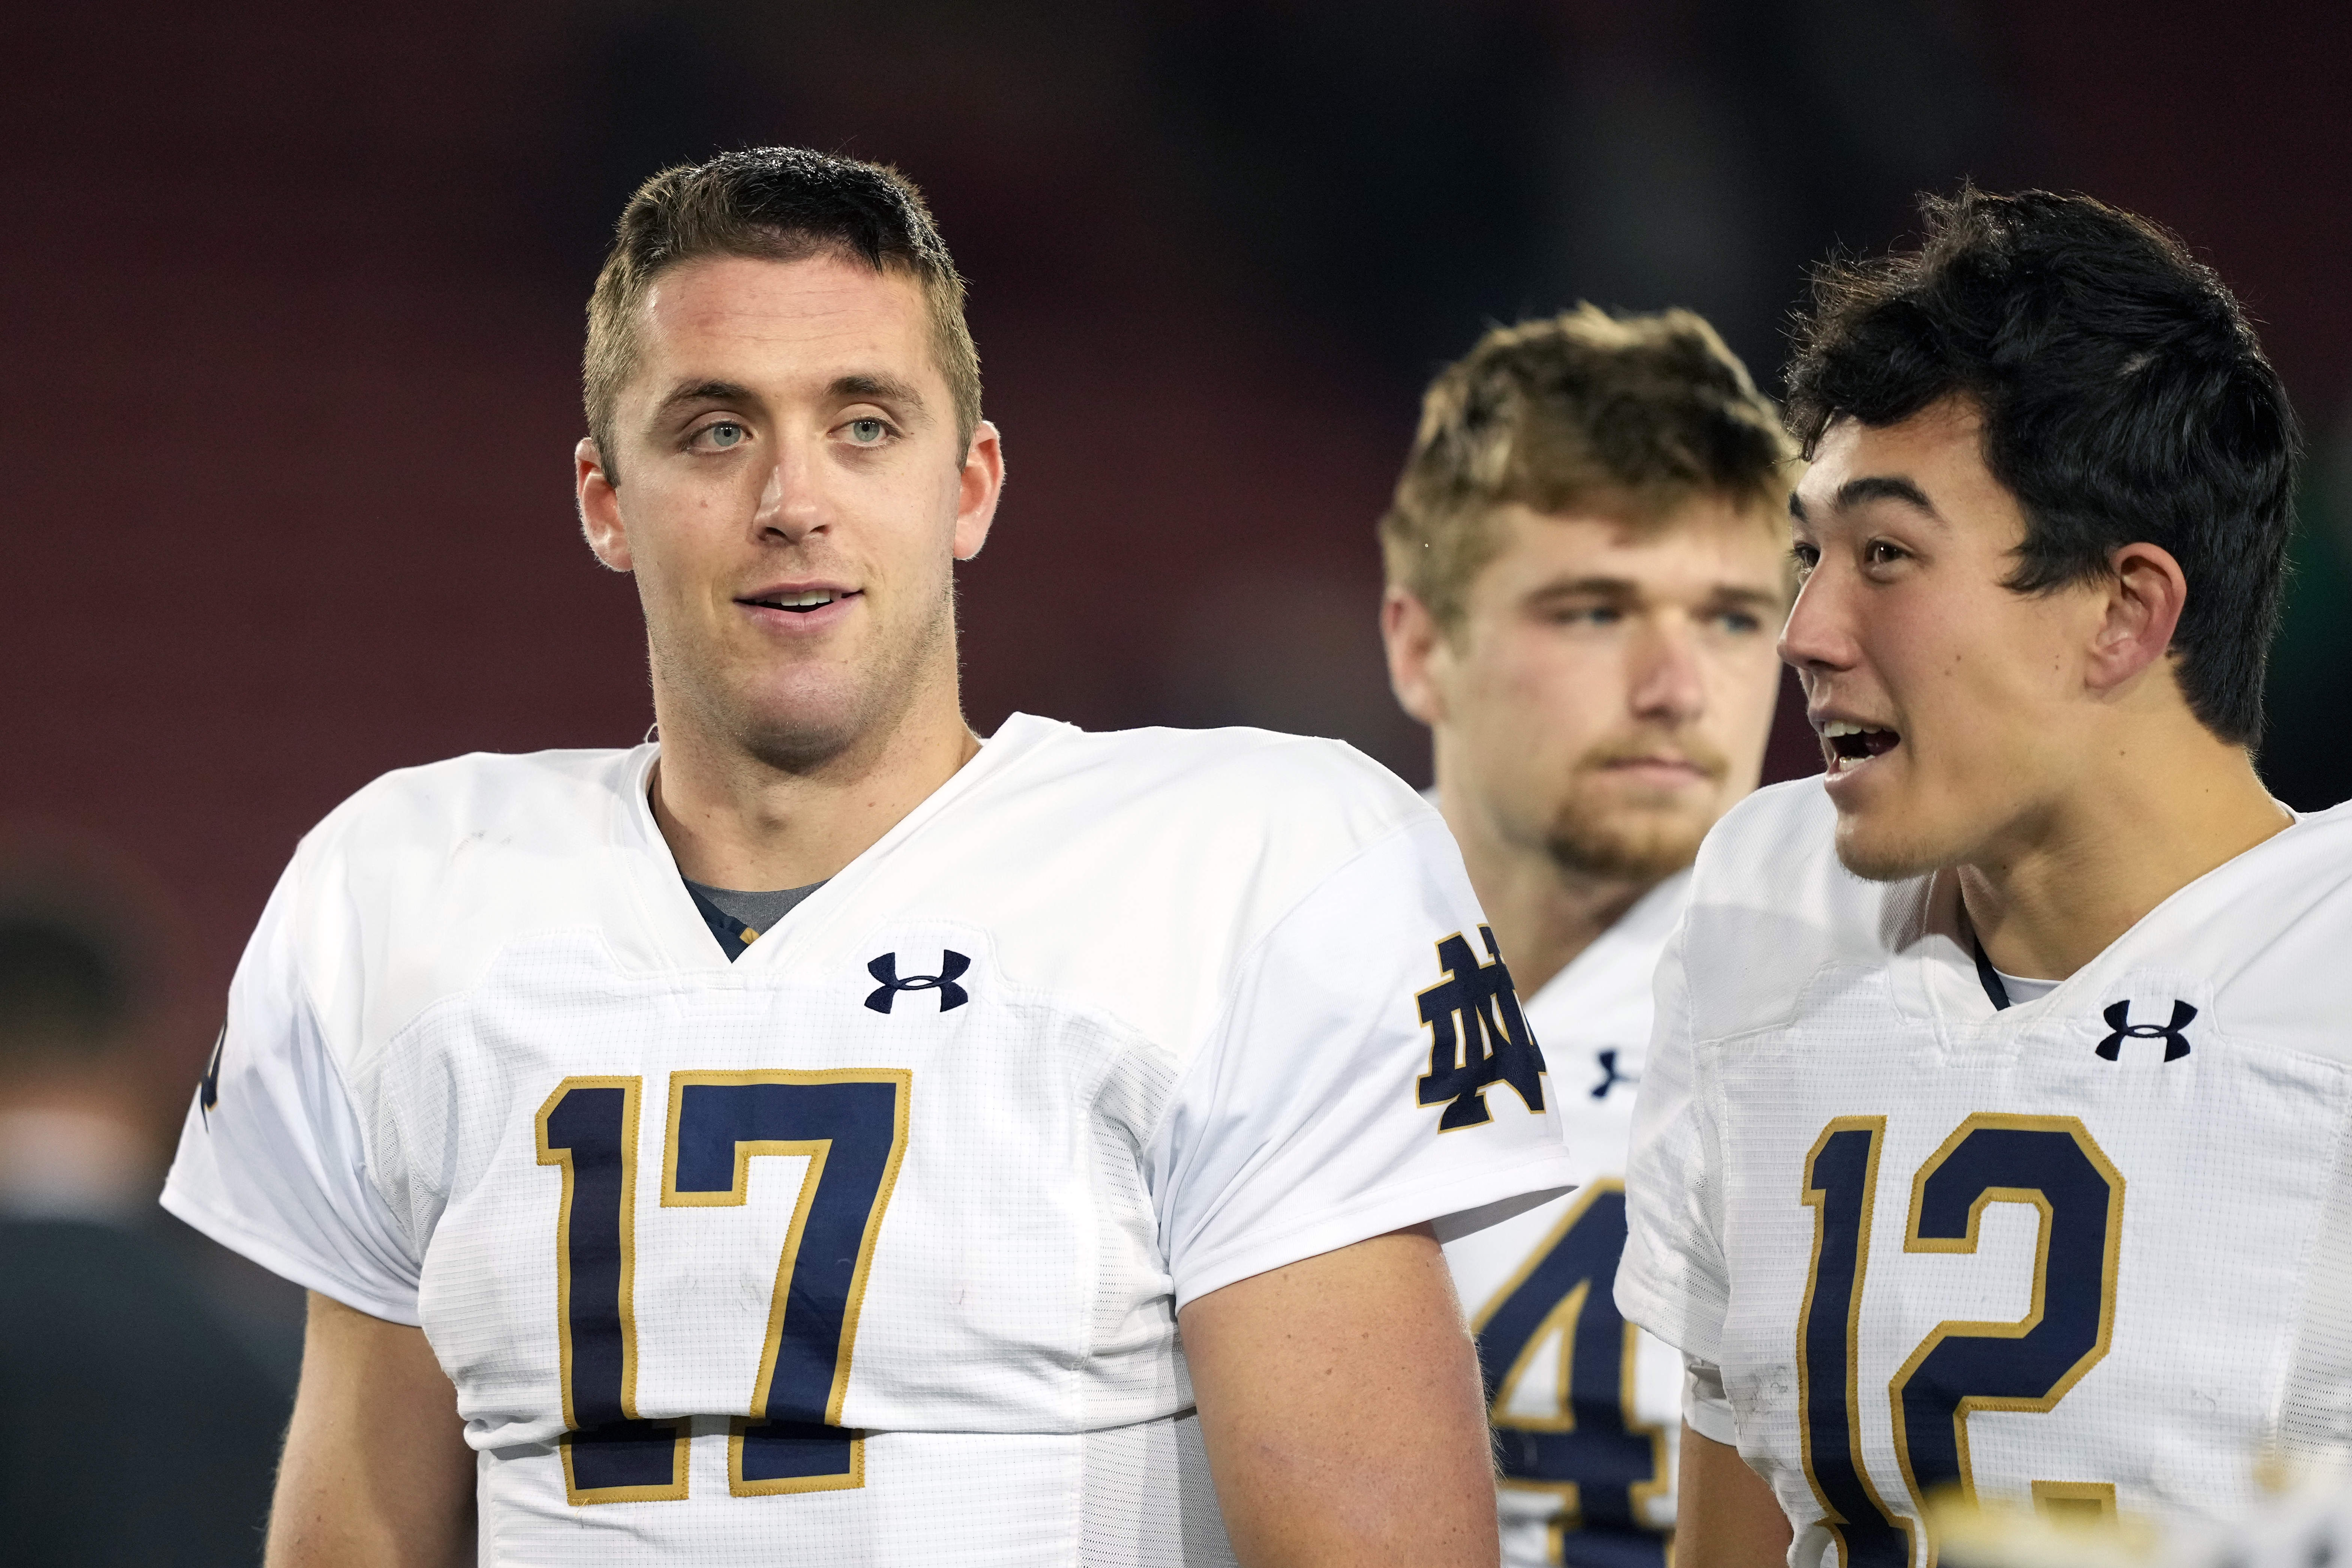 Notre Dame Fighting Irish quarterbacks Jack Coan and Tyler Buchner walk off the field after the game against the Stanford Cardinal at Stanford Stadium